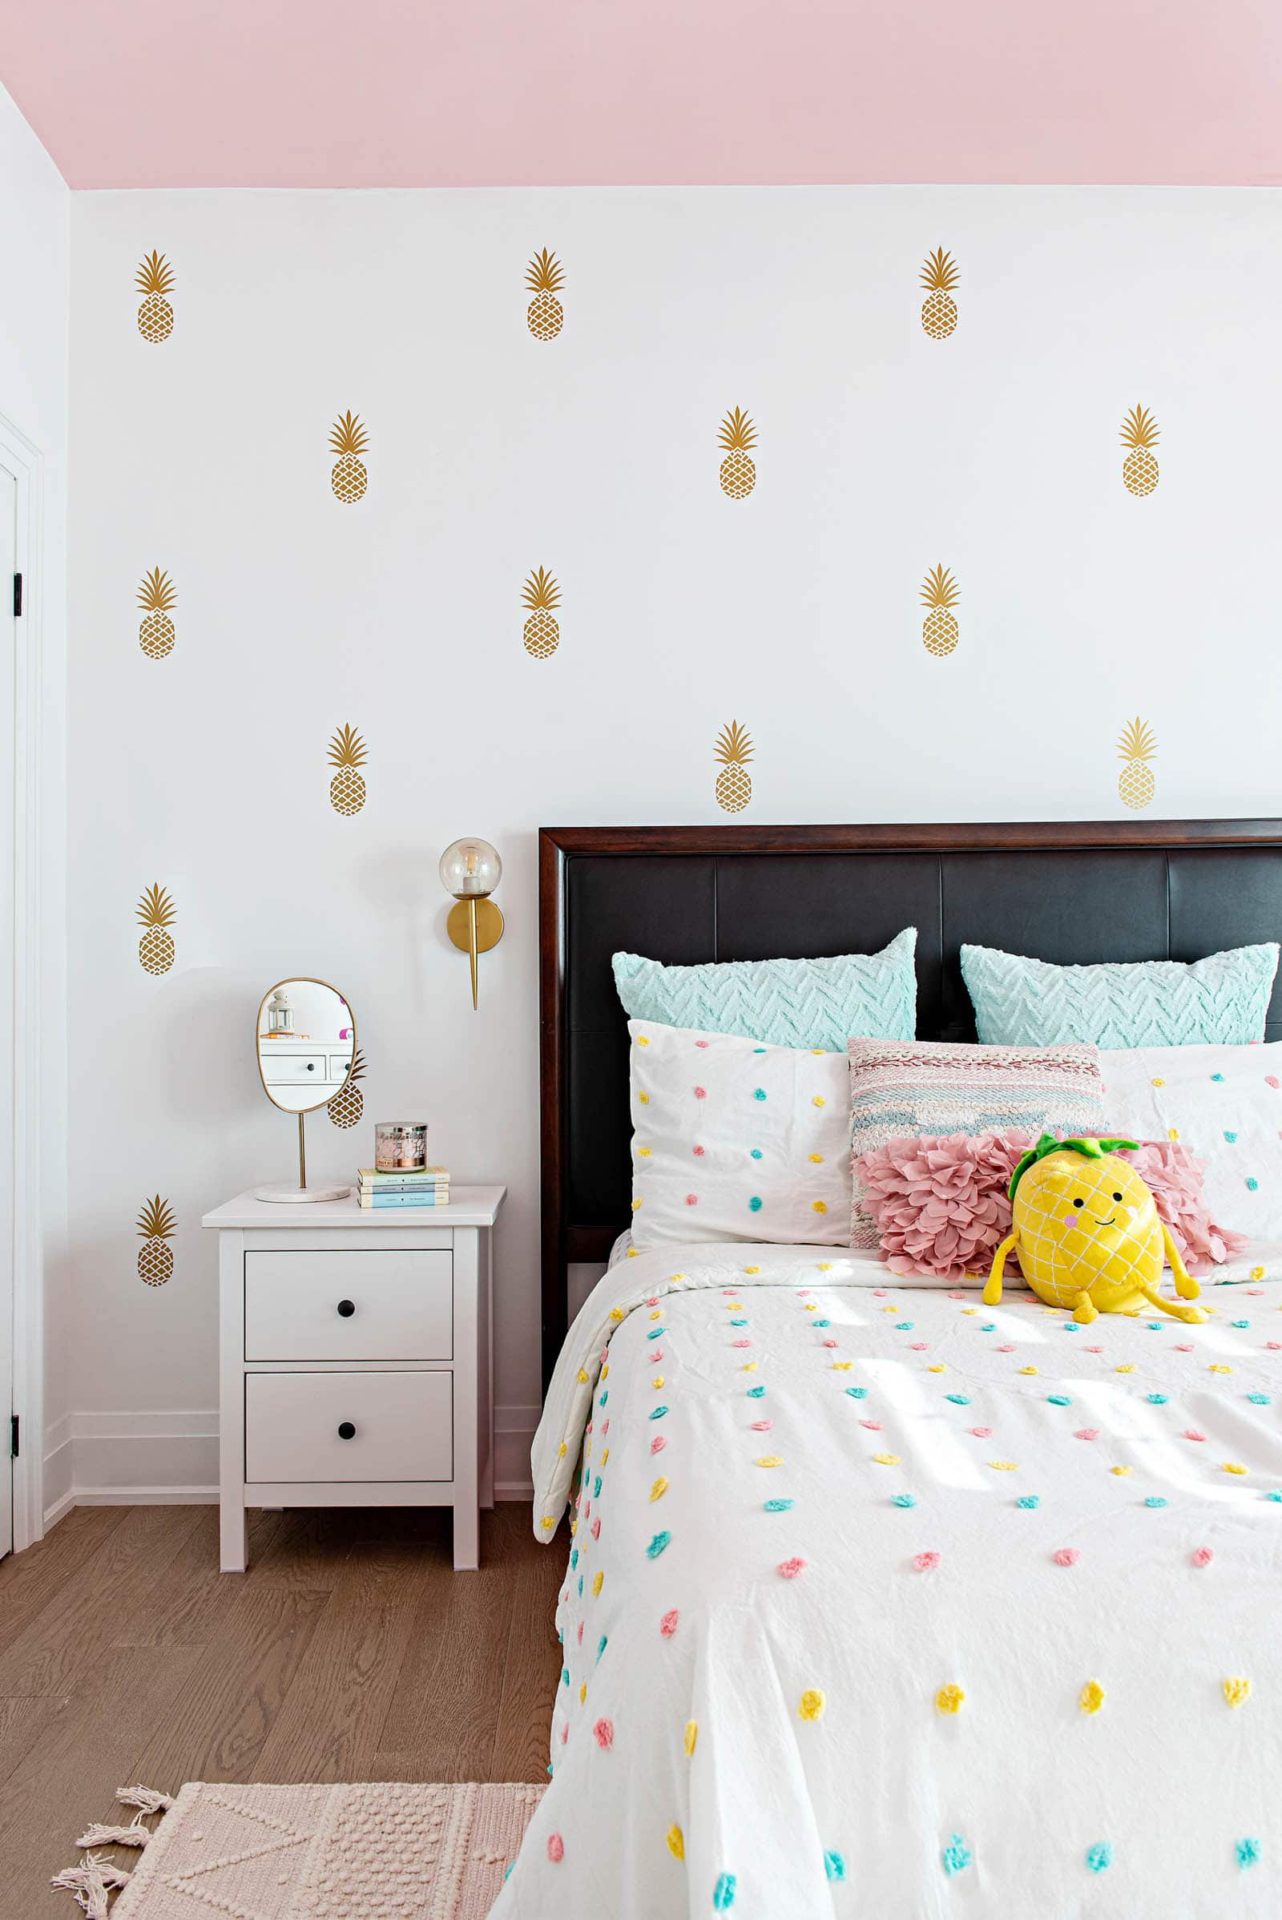 Girls bedroom with pink ceiling and pineapple wall decals